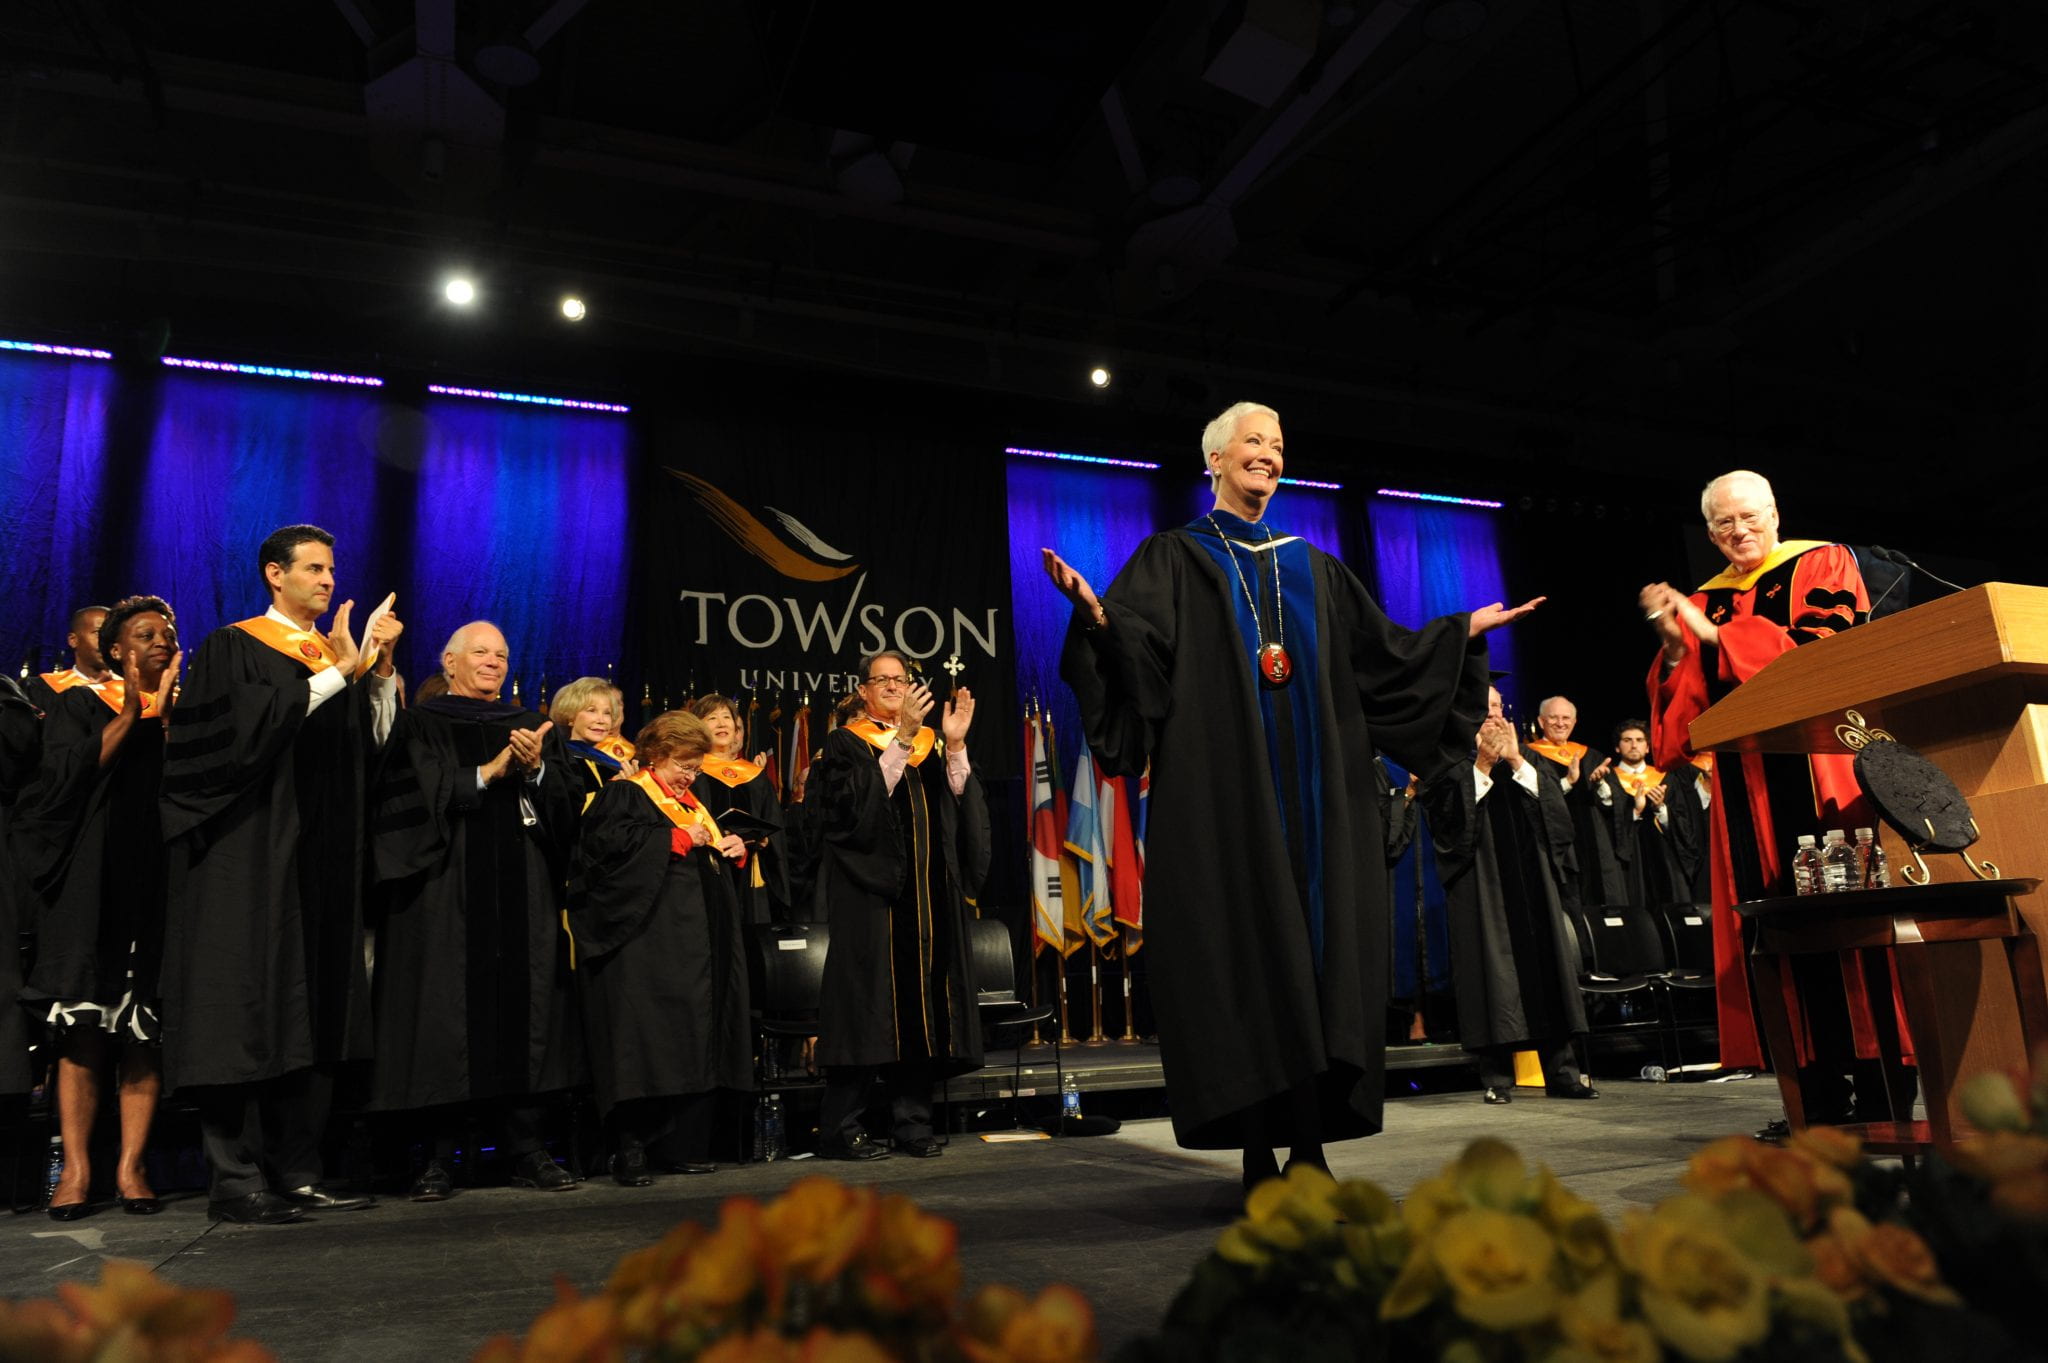 Loeschke, after receiving the Towson University medallion at her inauguration.